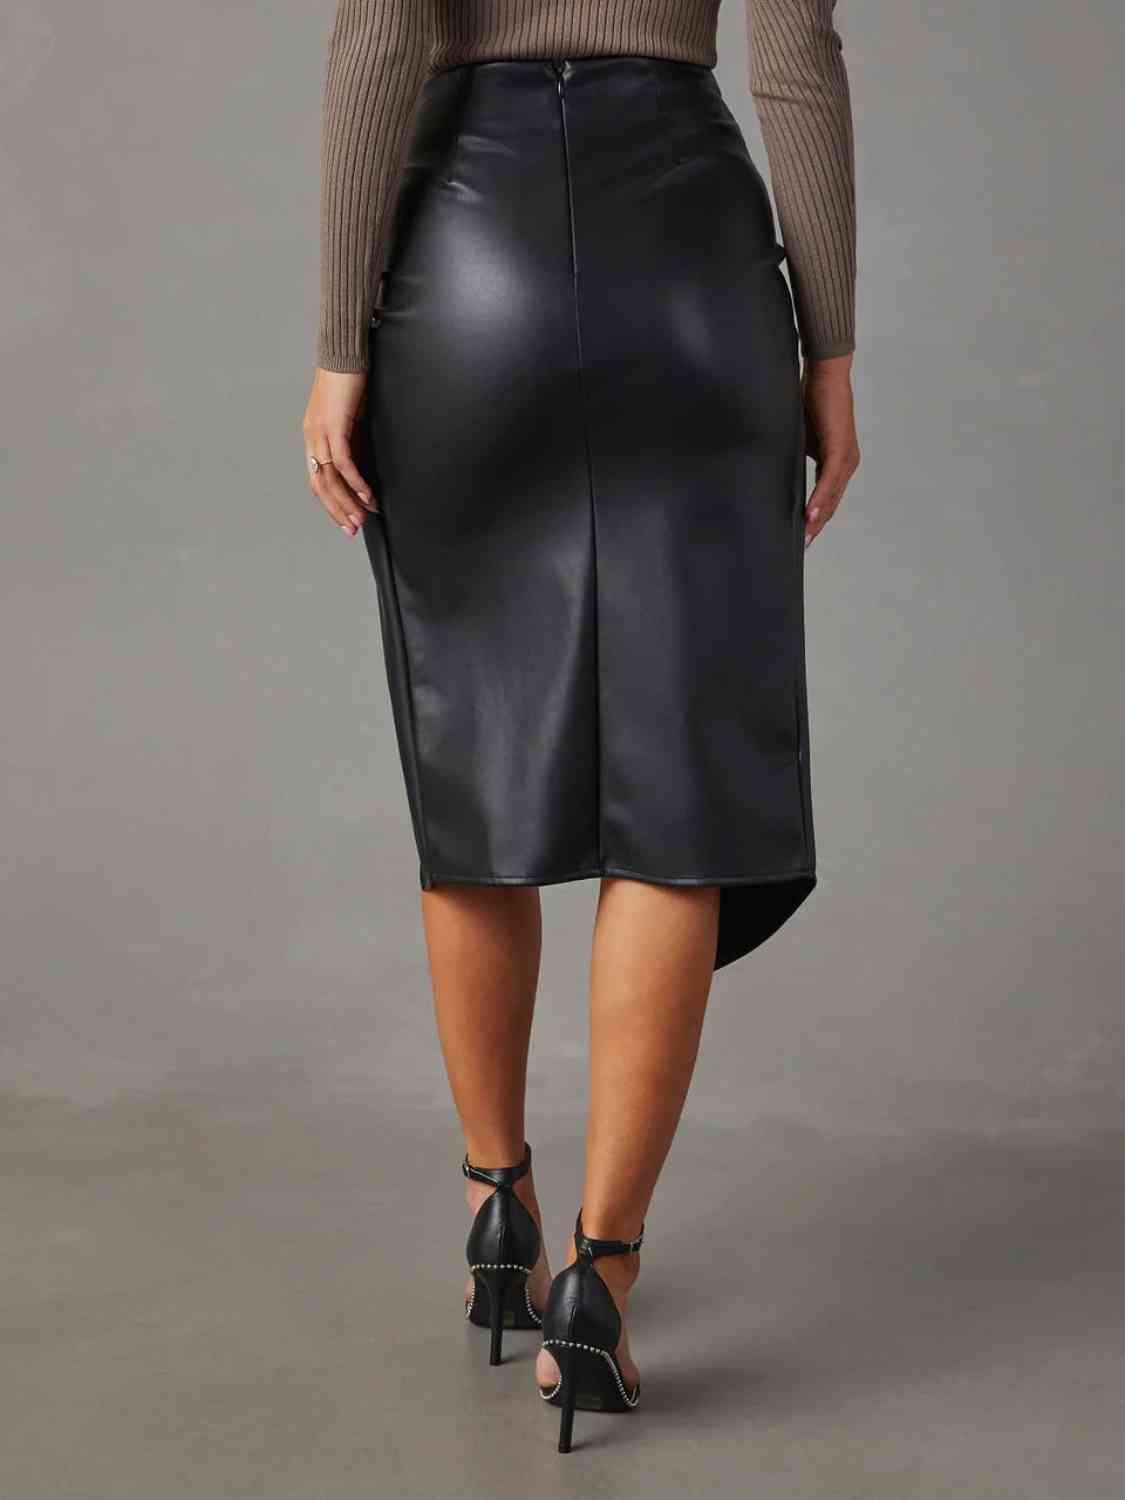 TWIST DETAIL HIGH WAISTED LEATHER LOOK SKIRT in Camel and Black